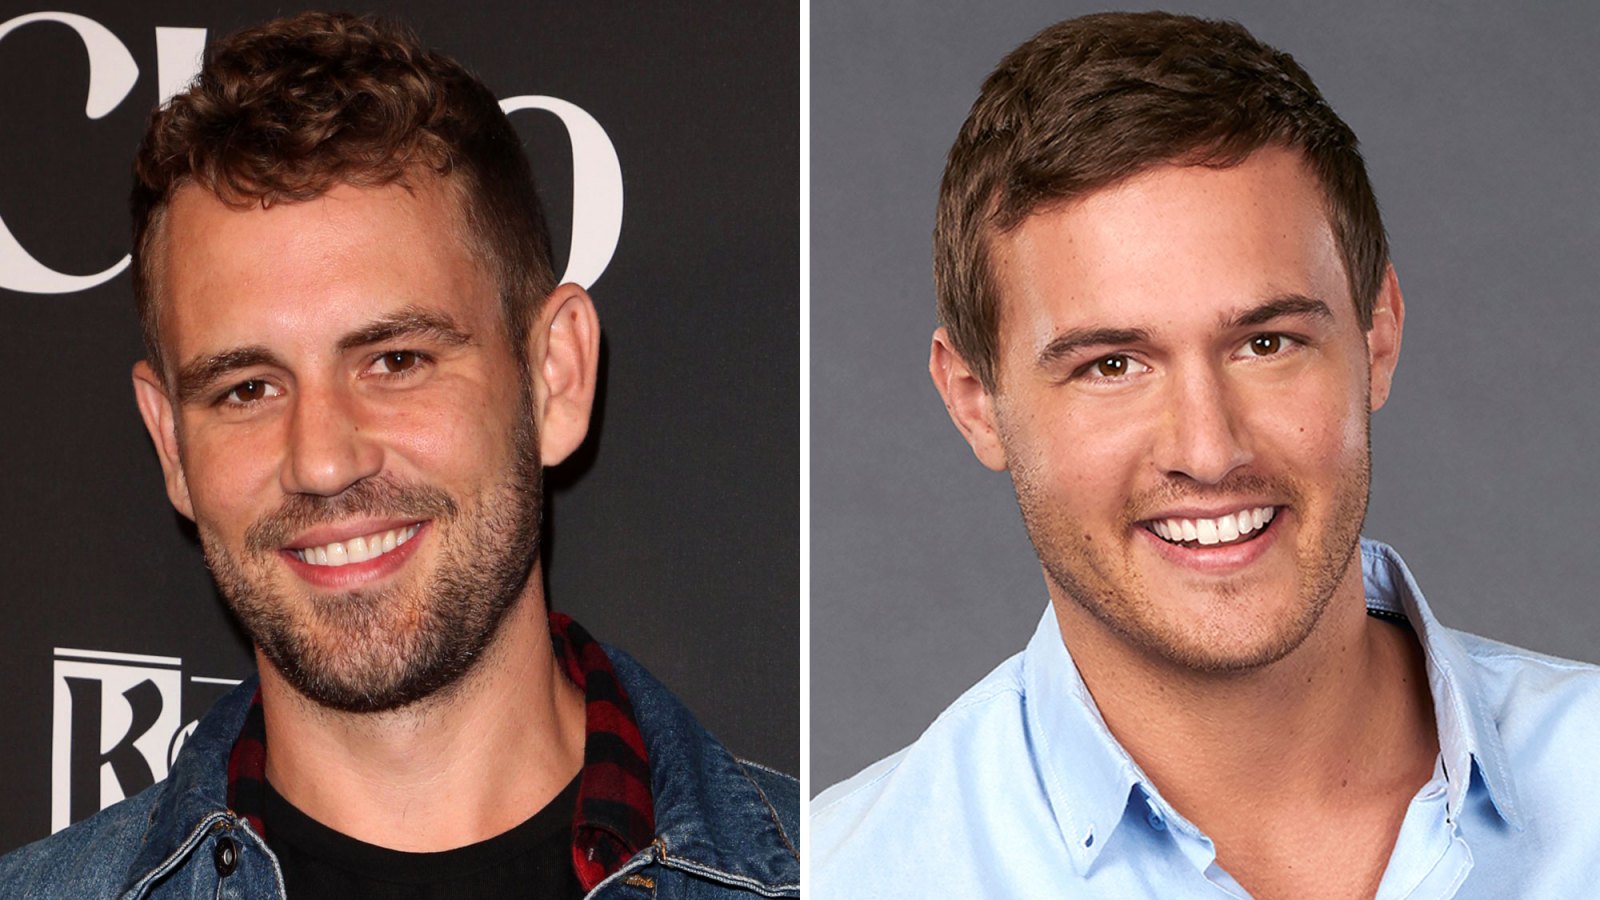 Nick Viall Pokes Fun at Pete Weber in Halloween Costume: 'Just a Pilot On a Flight for Love'